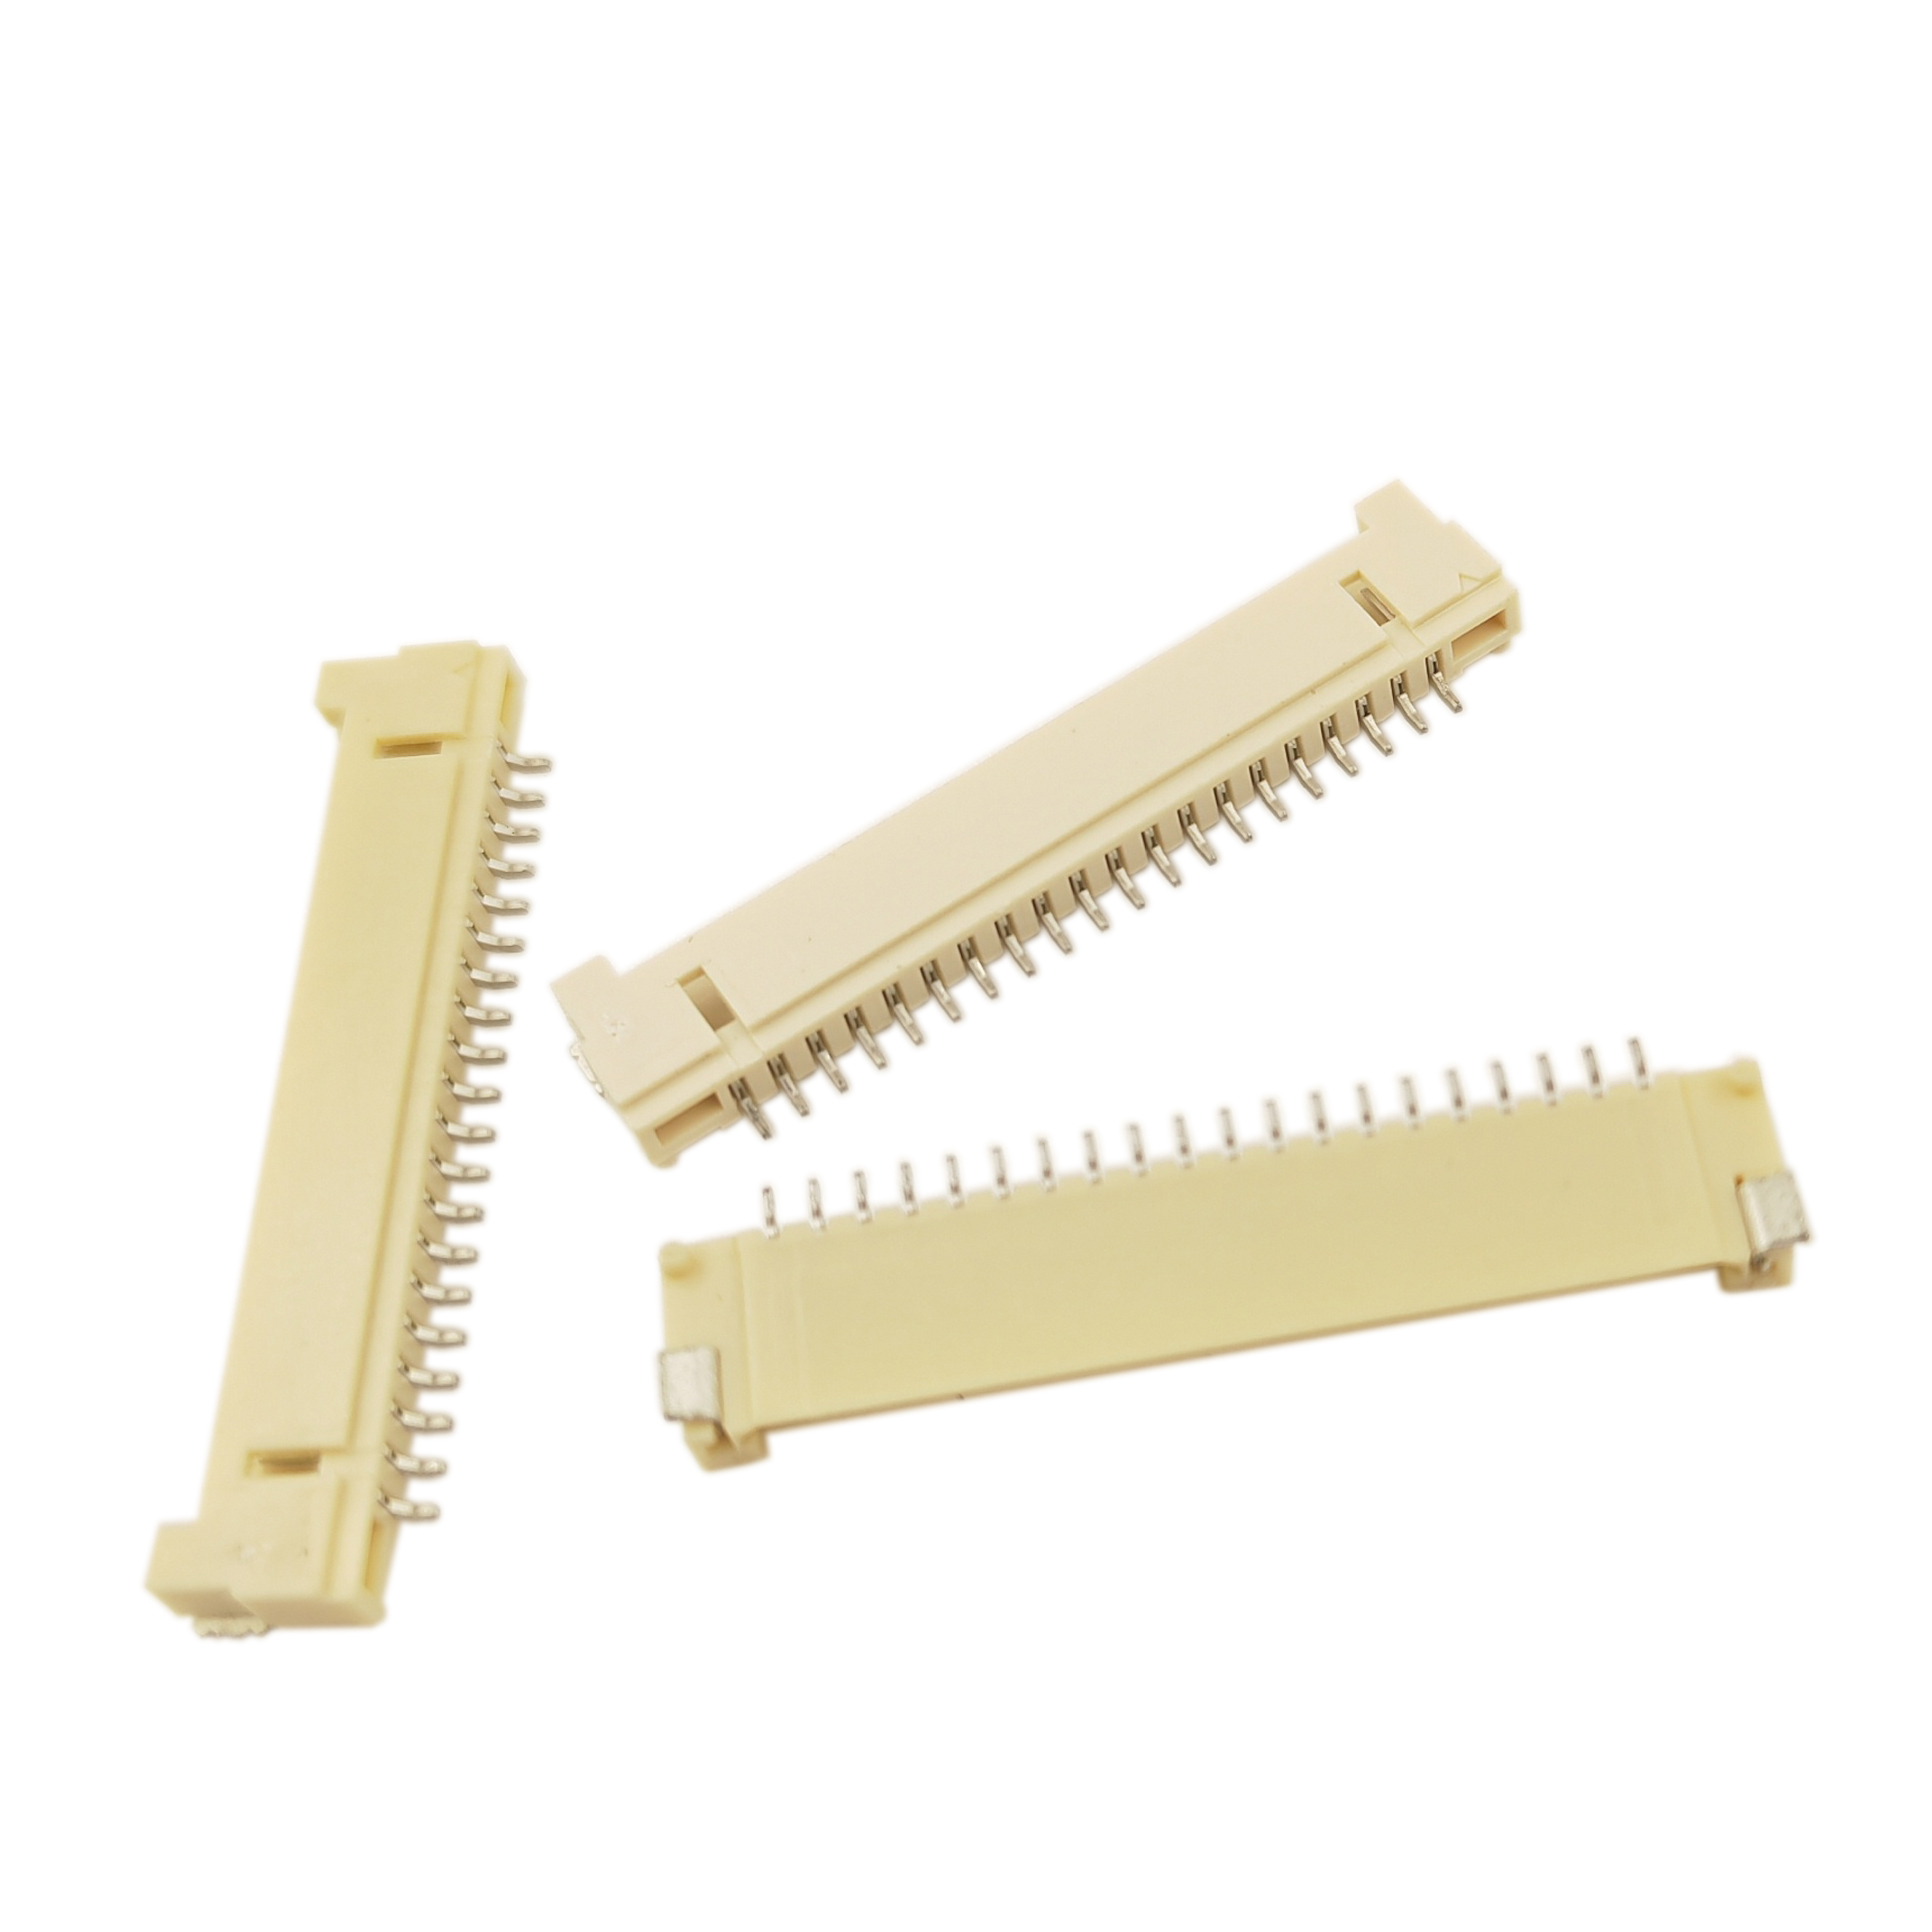 DF14-20P-1.25H is a 20-pin board-to-wire connector with a 1.25mm pitch, widely used for reliable connections in electronic applications. 